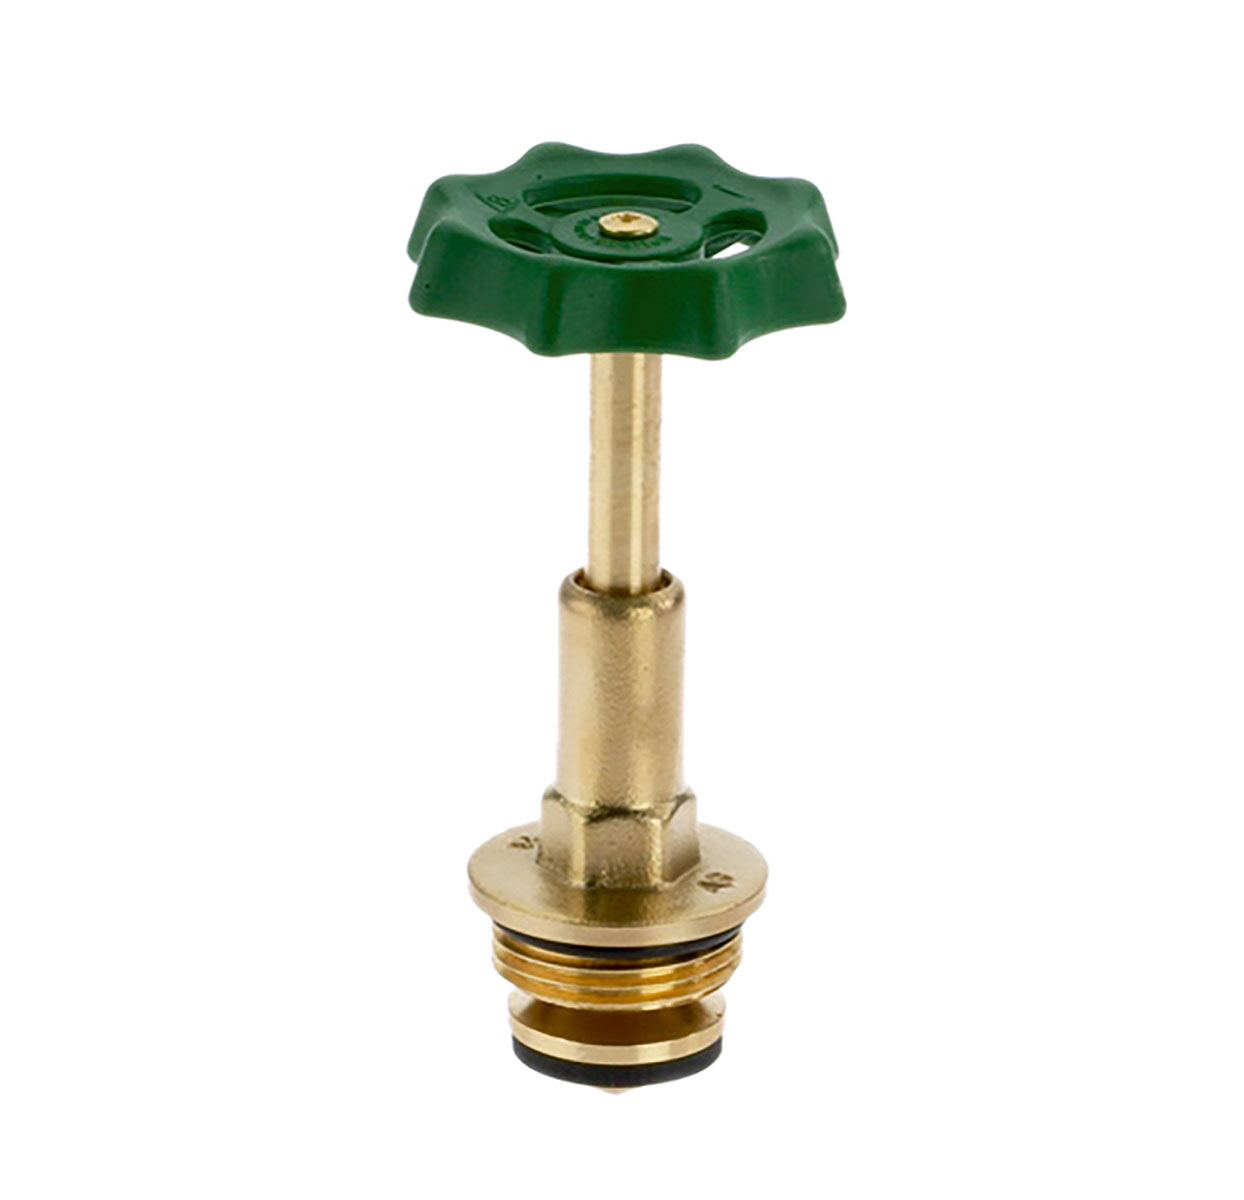 1212400 - Brass Upper-part with grease chamber for free-flow valves, rising spindle